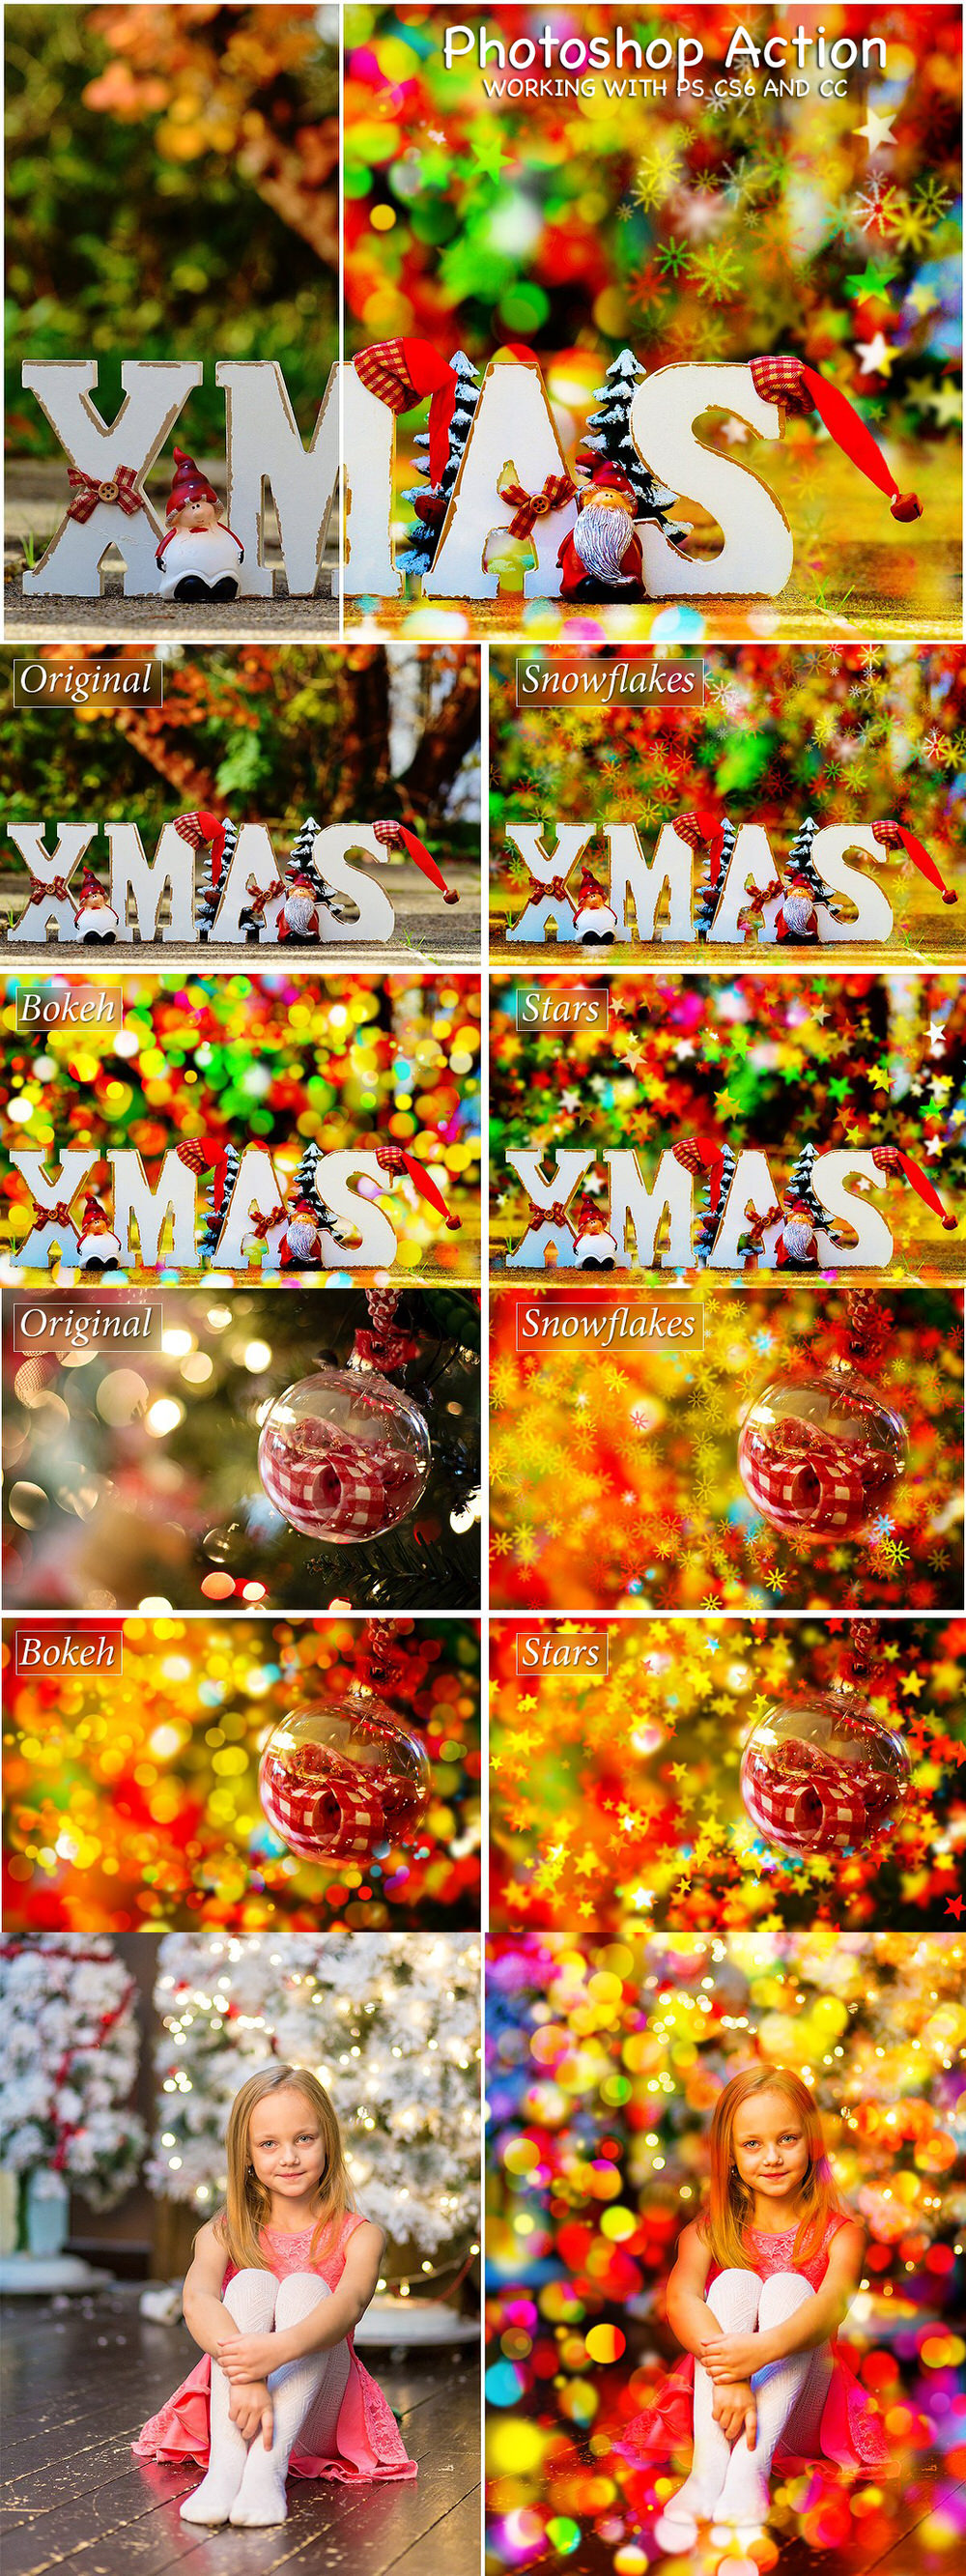 Download A New Christmas Deal With 400+ Holiday Overlays - Blog Lorelei Web Design